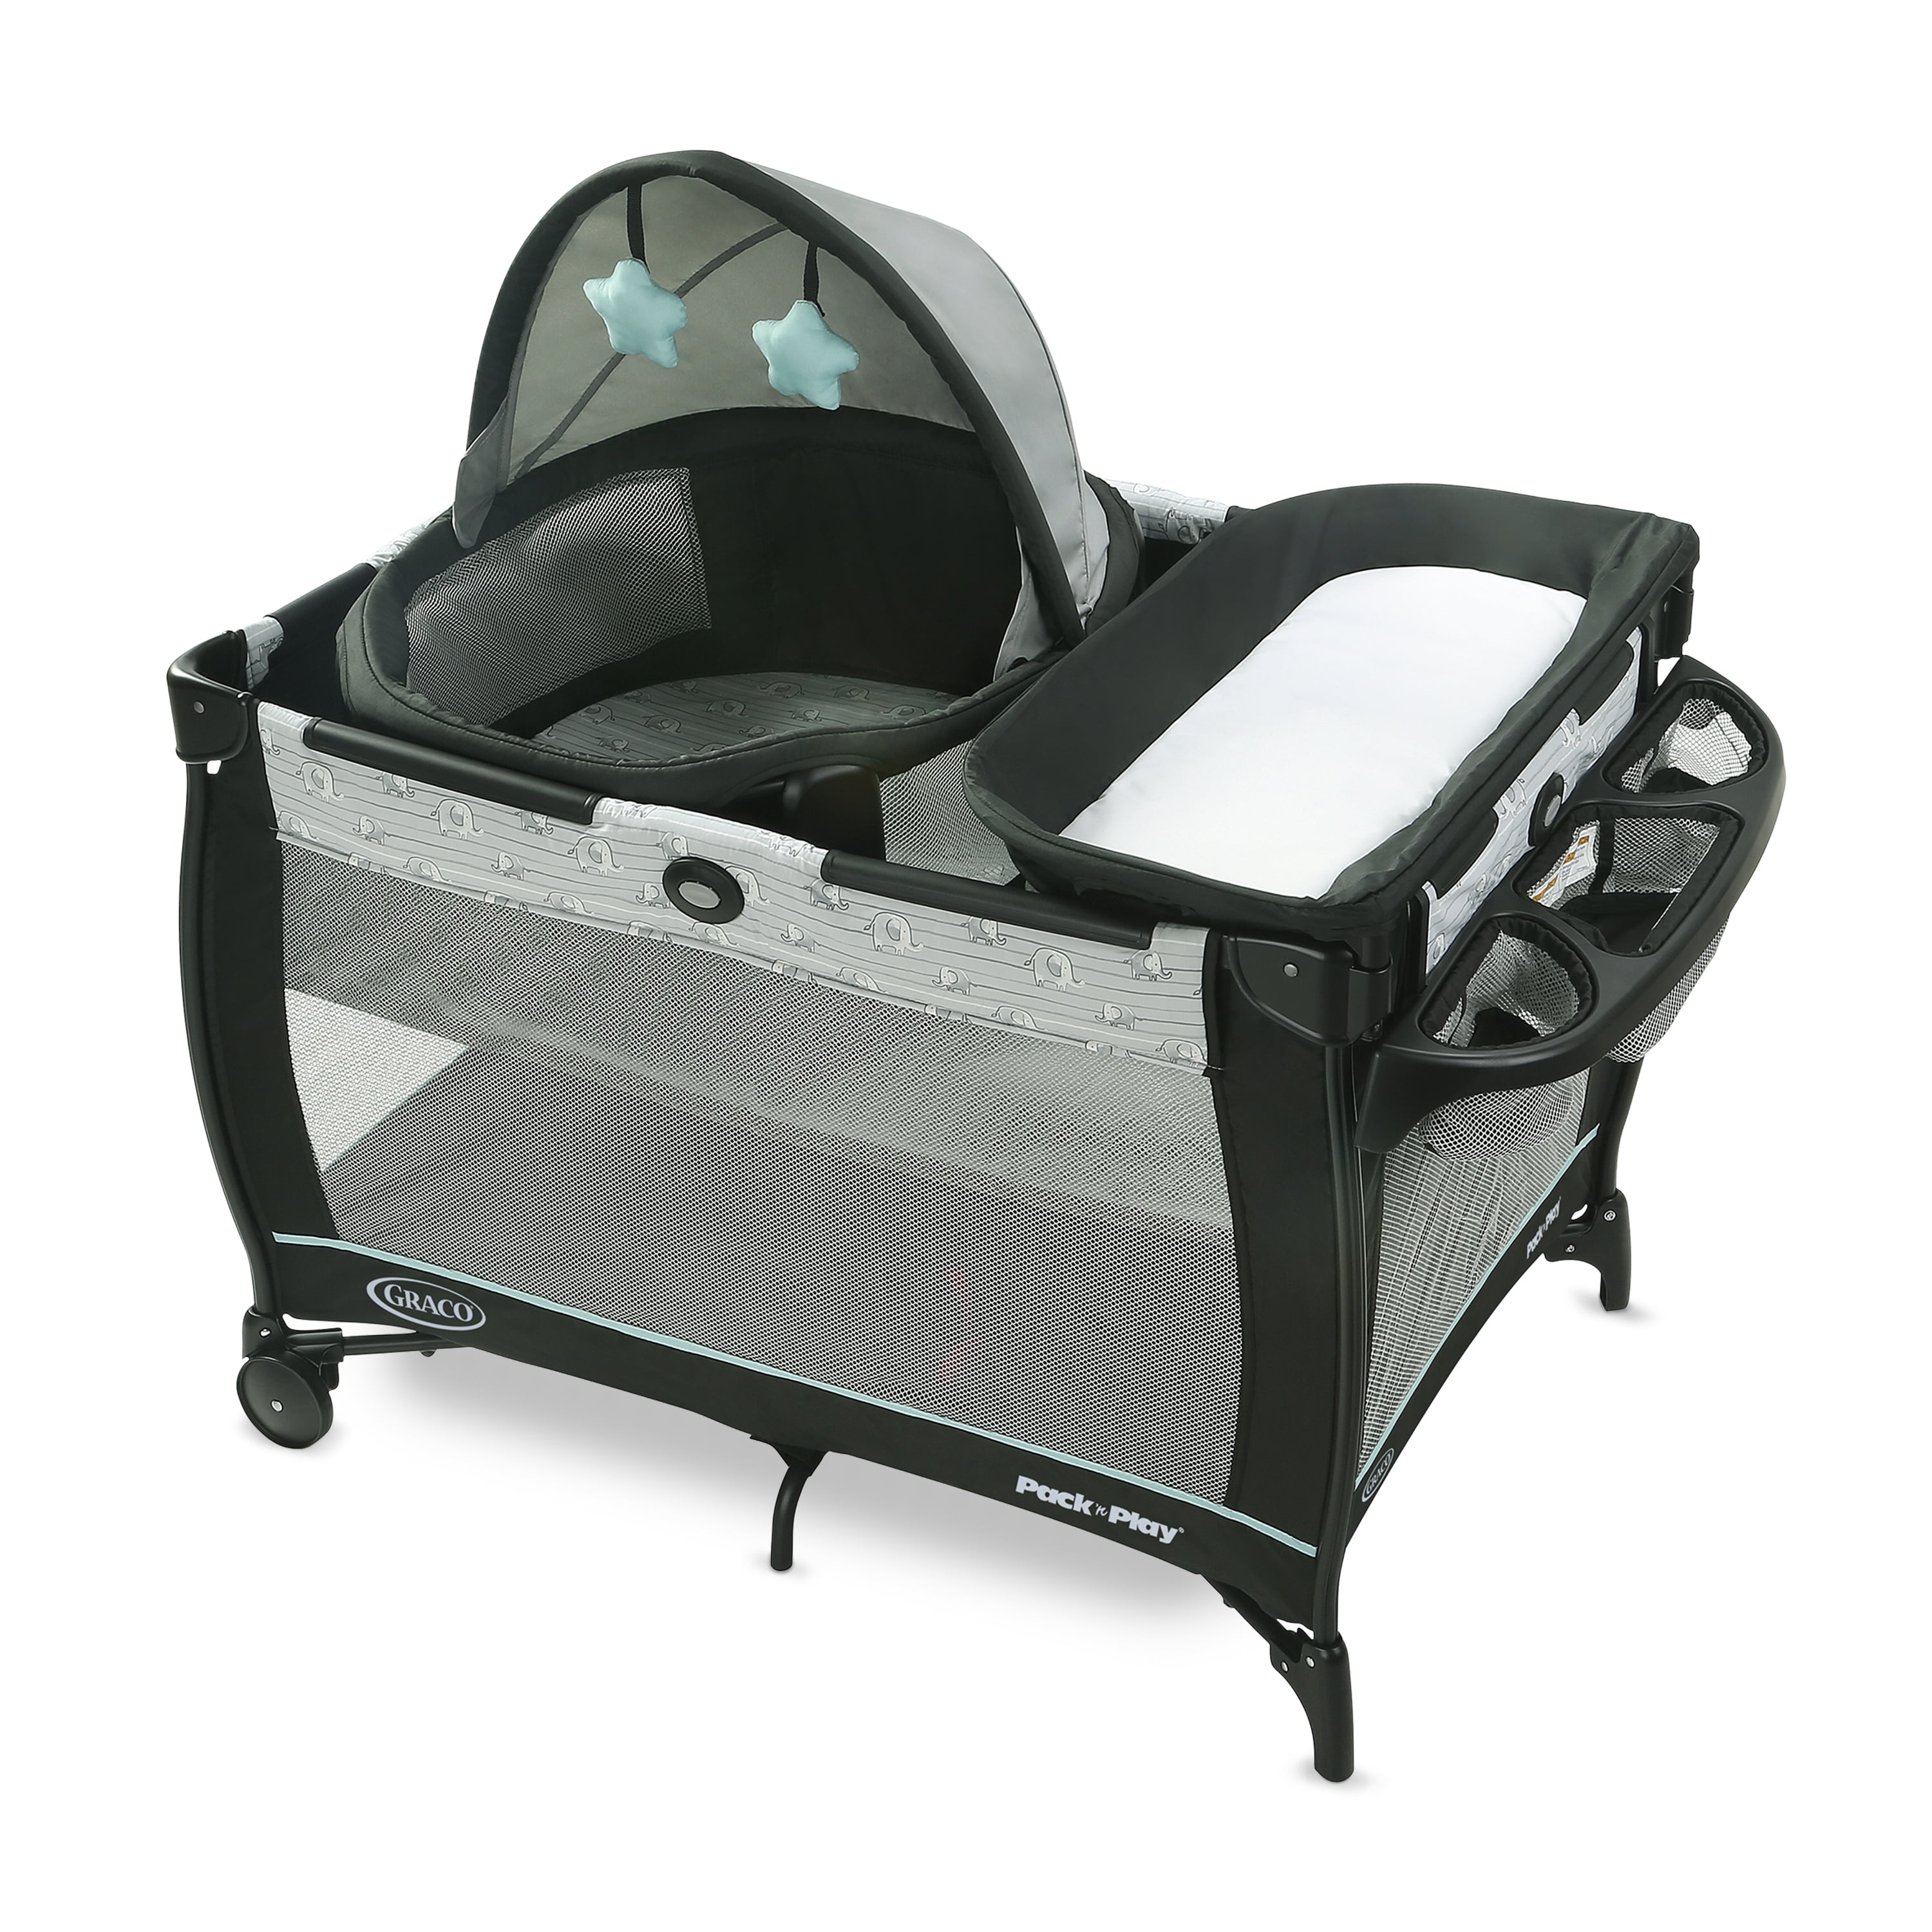 Graco Pack 'n Play Travel Dome DLX Playard, Archie, 39.07 lbs, Unisex 